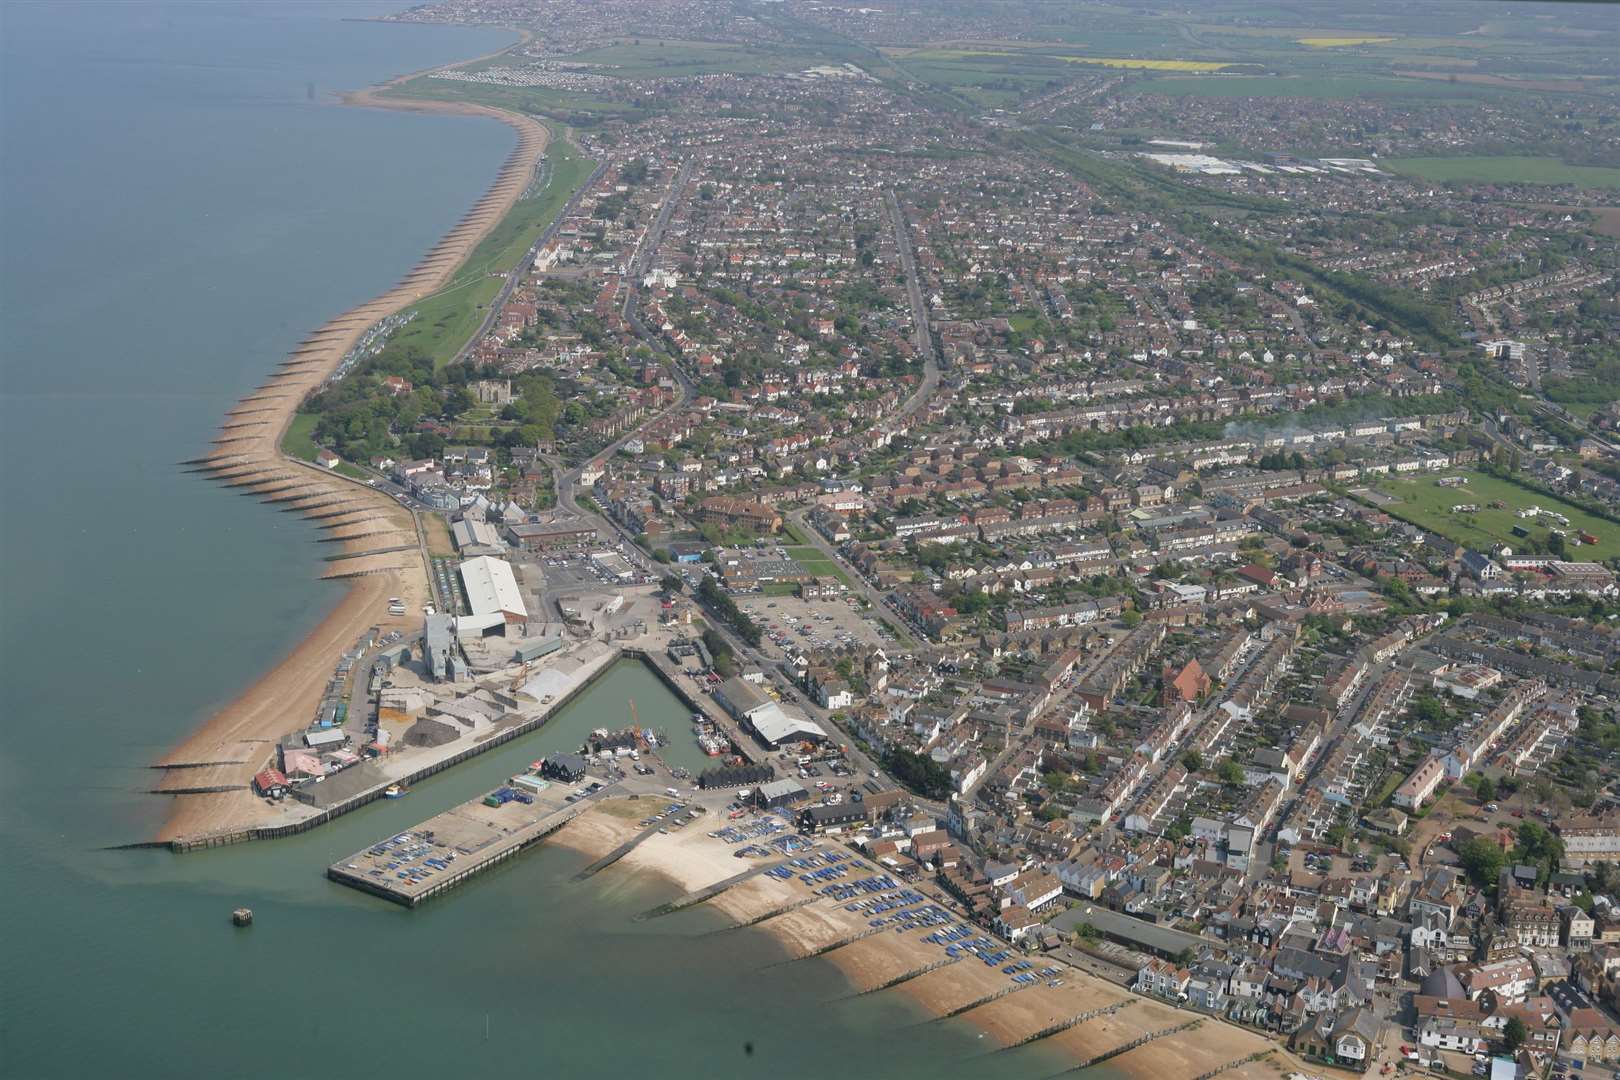 Whitstable is another popular Airbnb destination, with more than 300 available, compared to just 17 rental properties on Rightmove